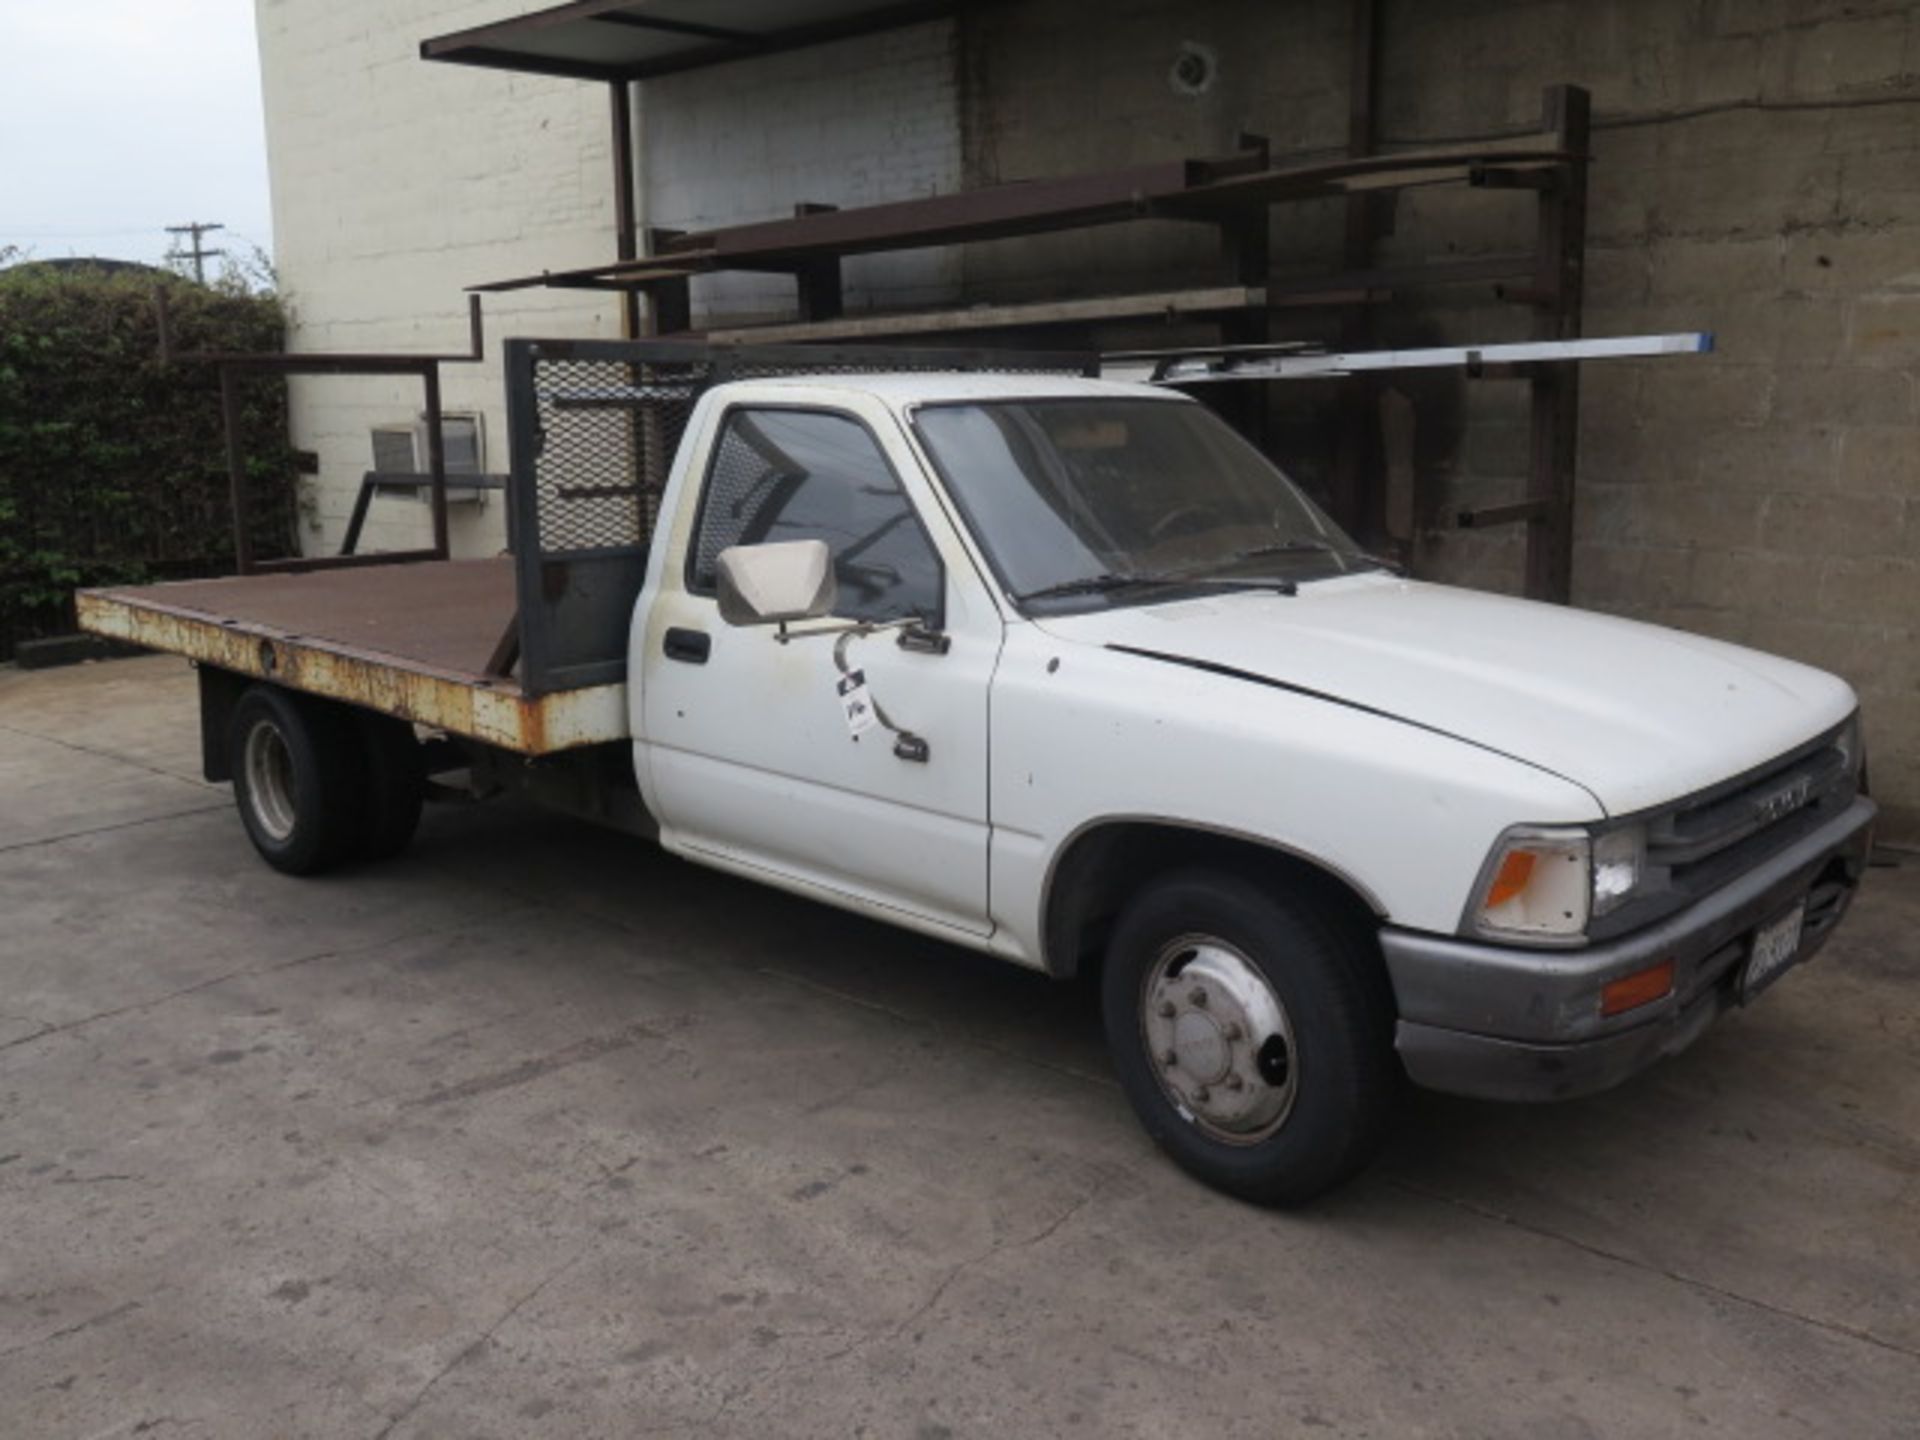 1991 Toyota 9’ Stake Bed Truck Lisc # 4F45131 w/ V6 Gas Engine, Automatic Trans, Dual Rear Wheels,